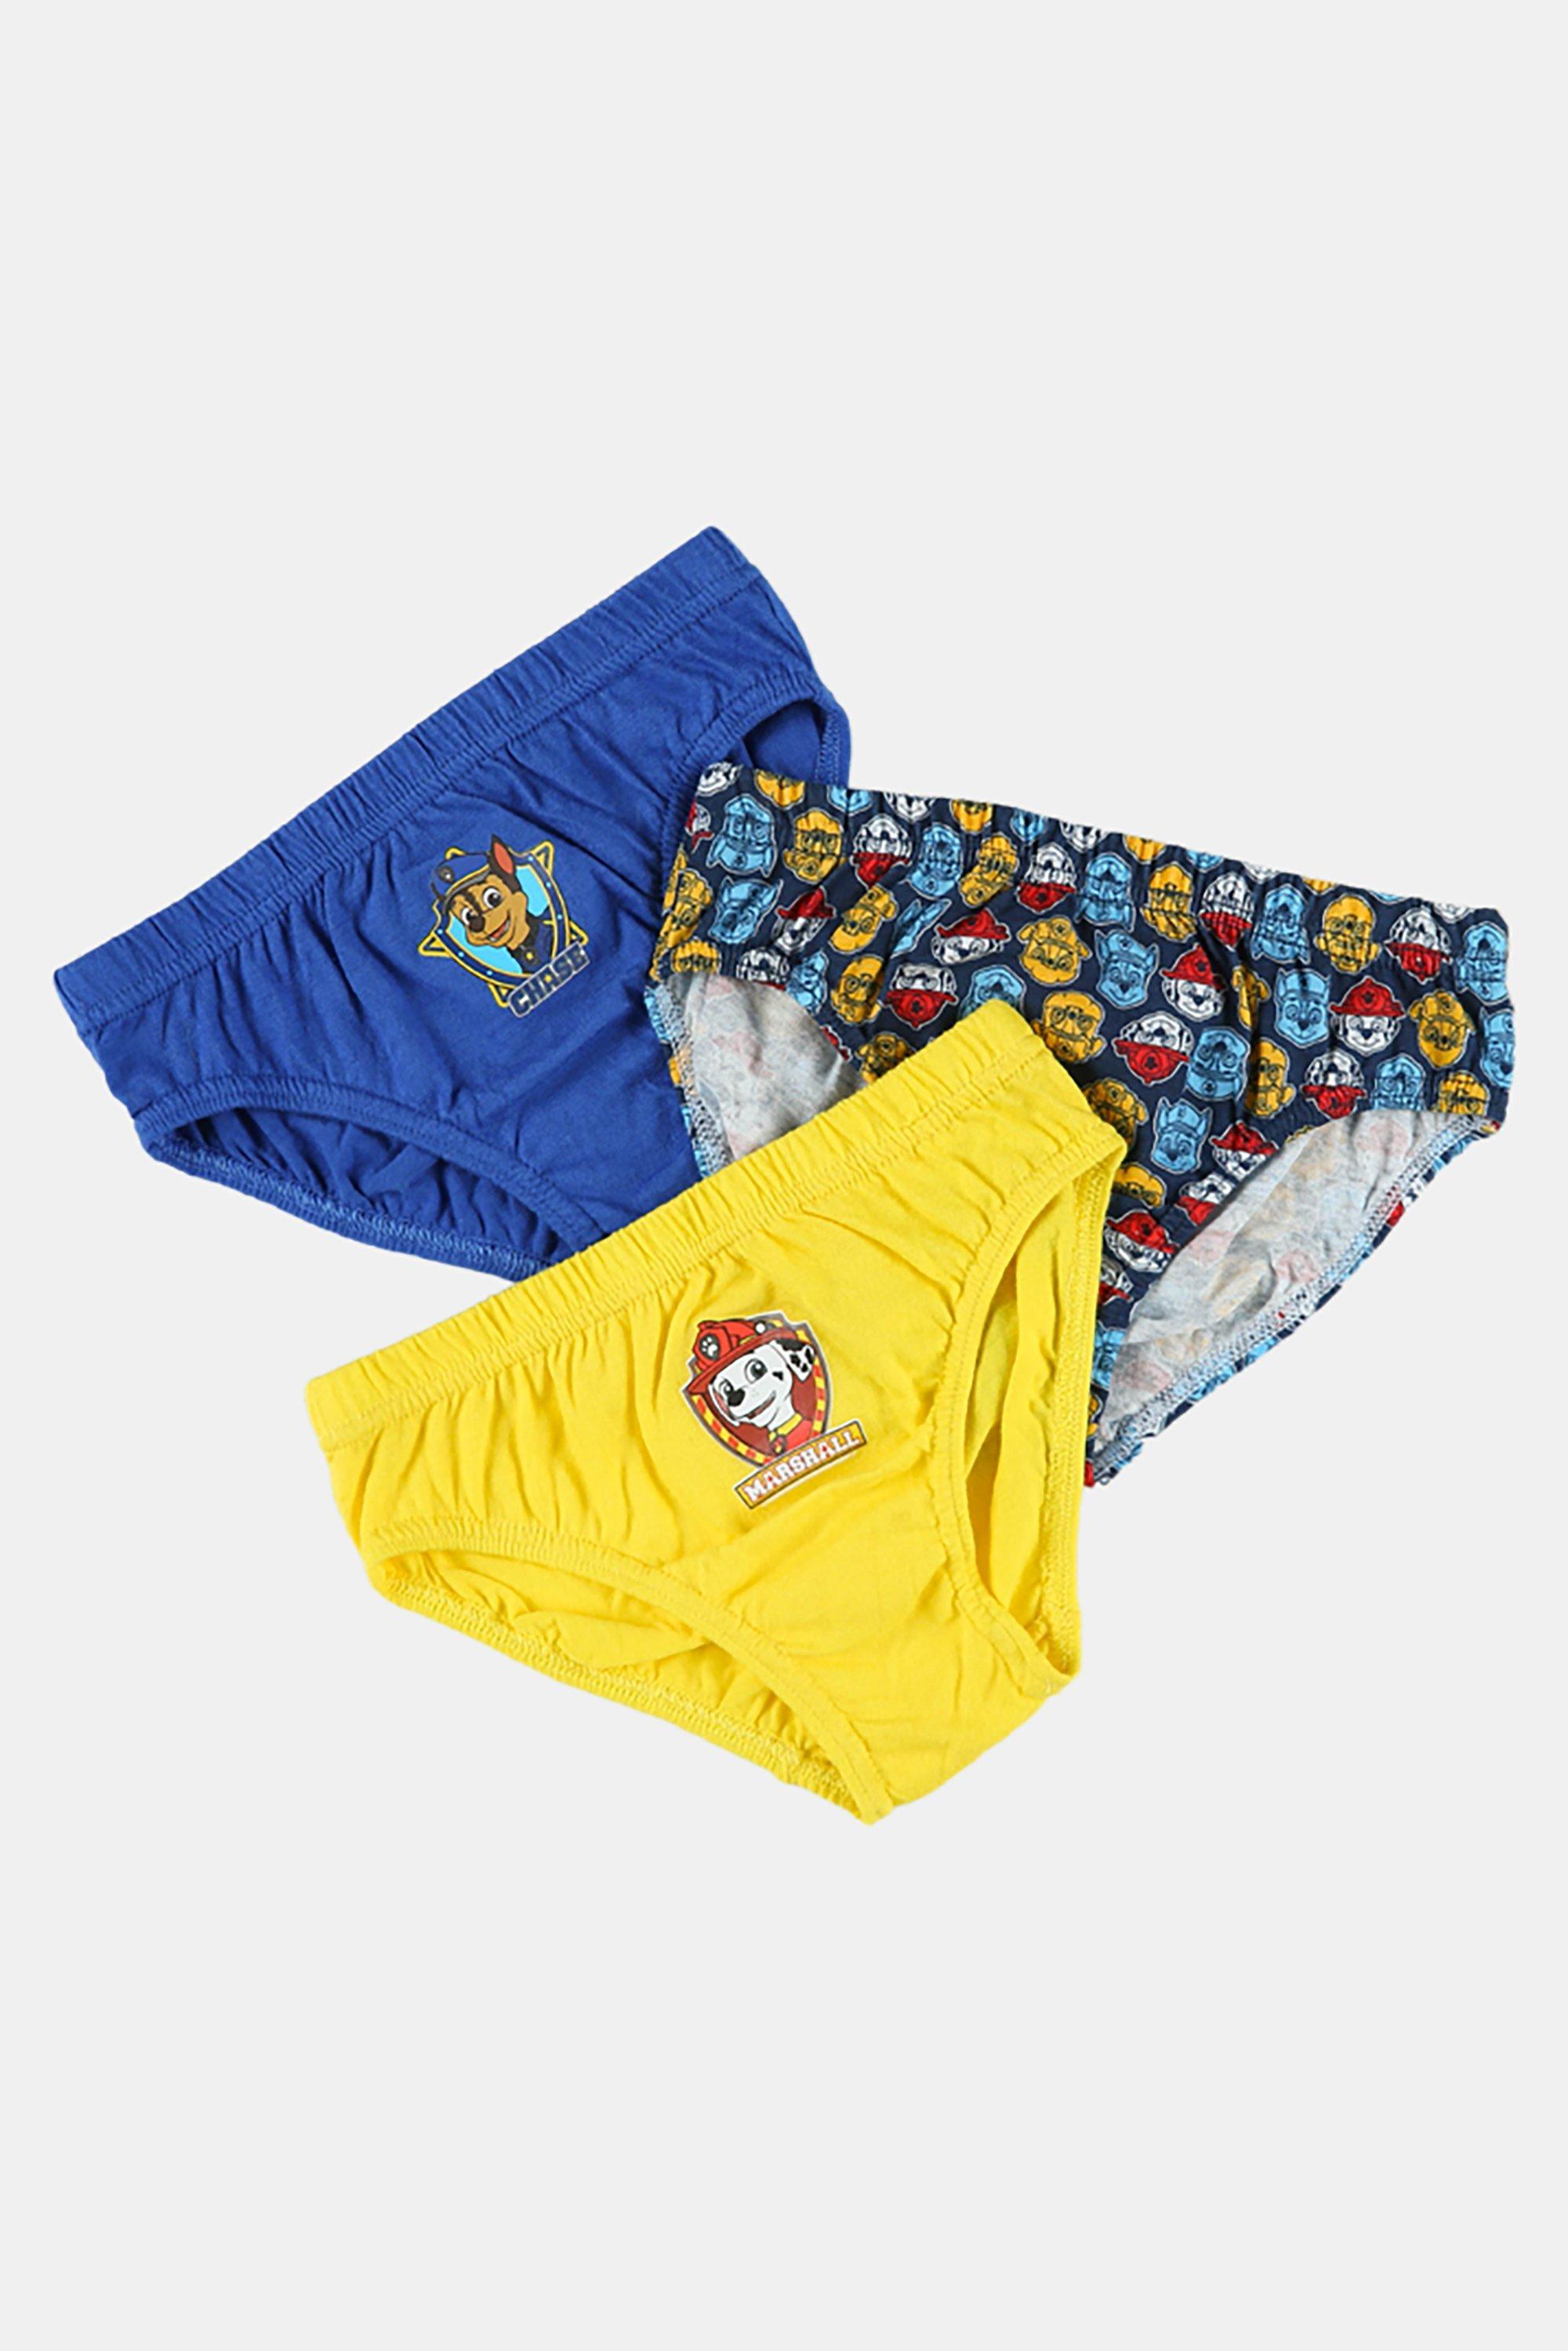  Paw Patrol Boys' Underwear Pack of 3 Size 18M Multicolored:  Clothing, Shoes & Jewelry